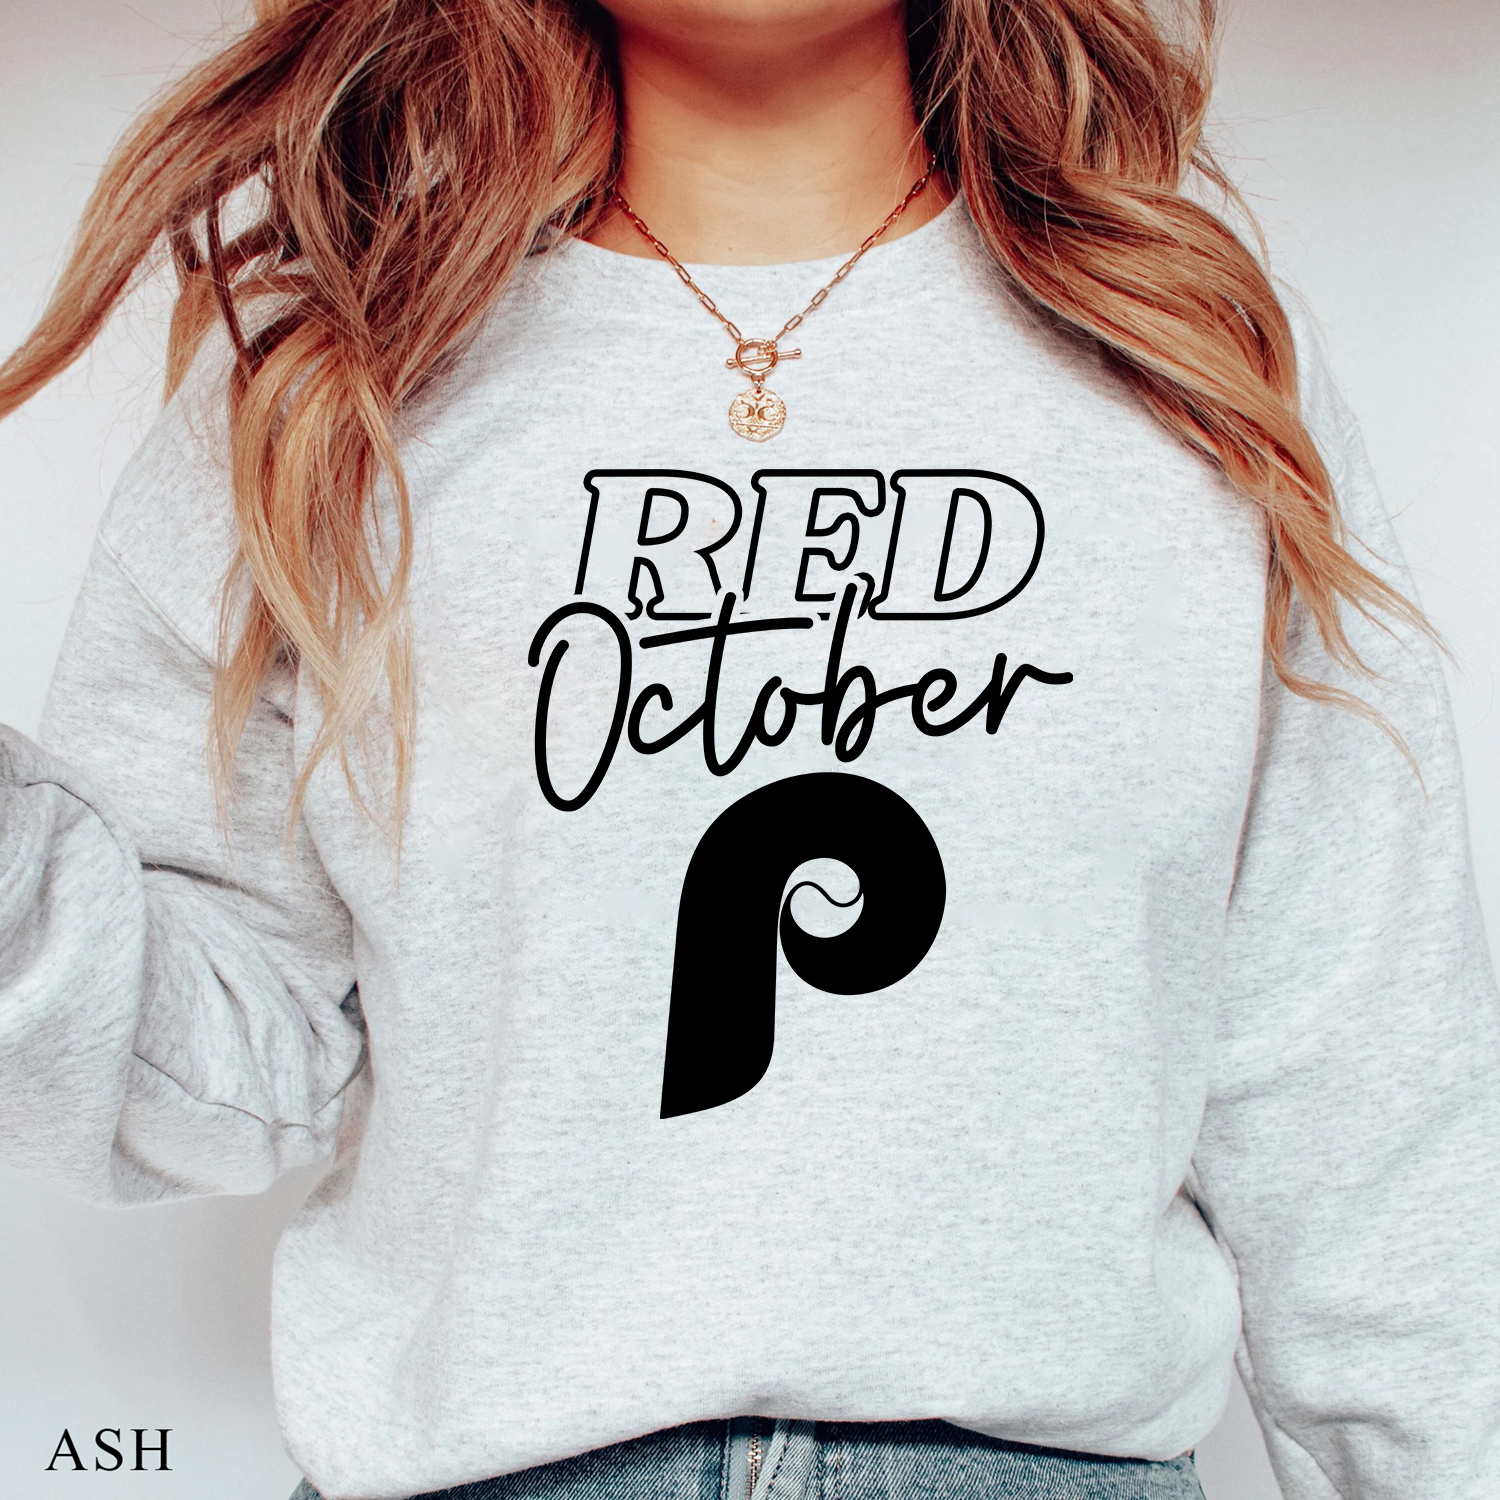 Red October Phillies Shirt, Cool phillies Shirts, Gifts for Phillies Fans -  Happy Place for Music Lovers